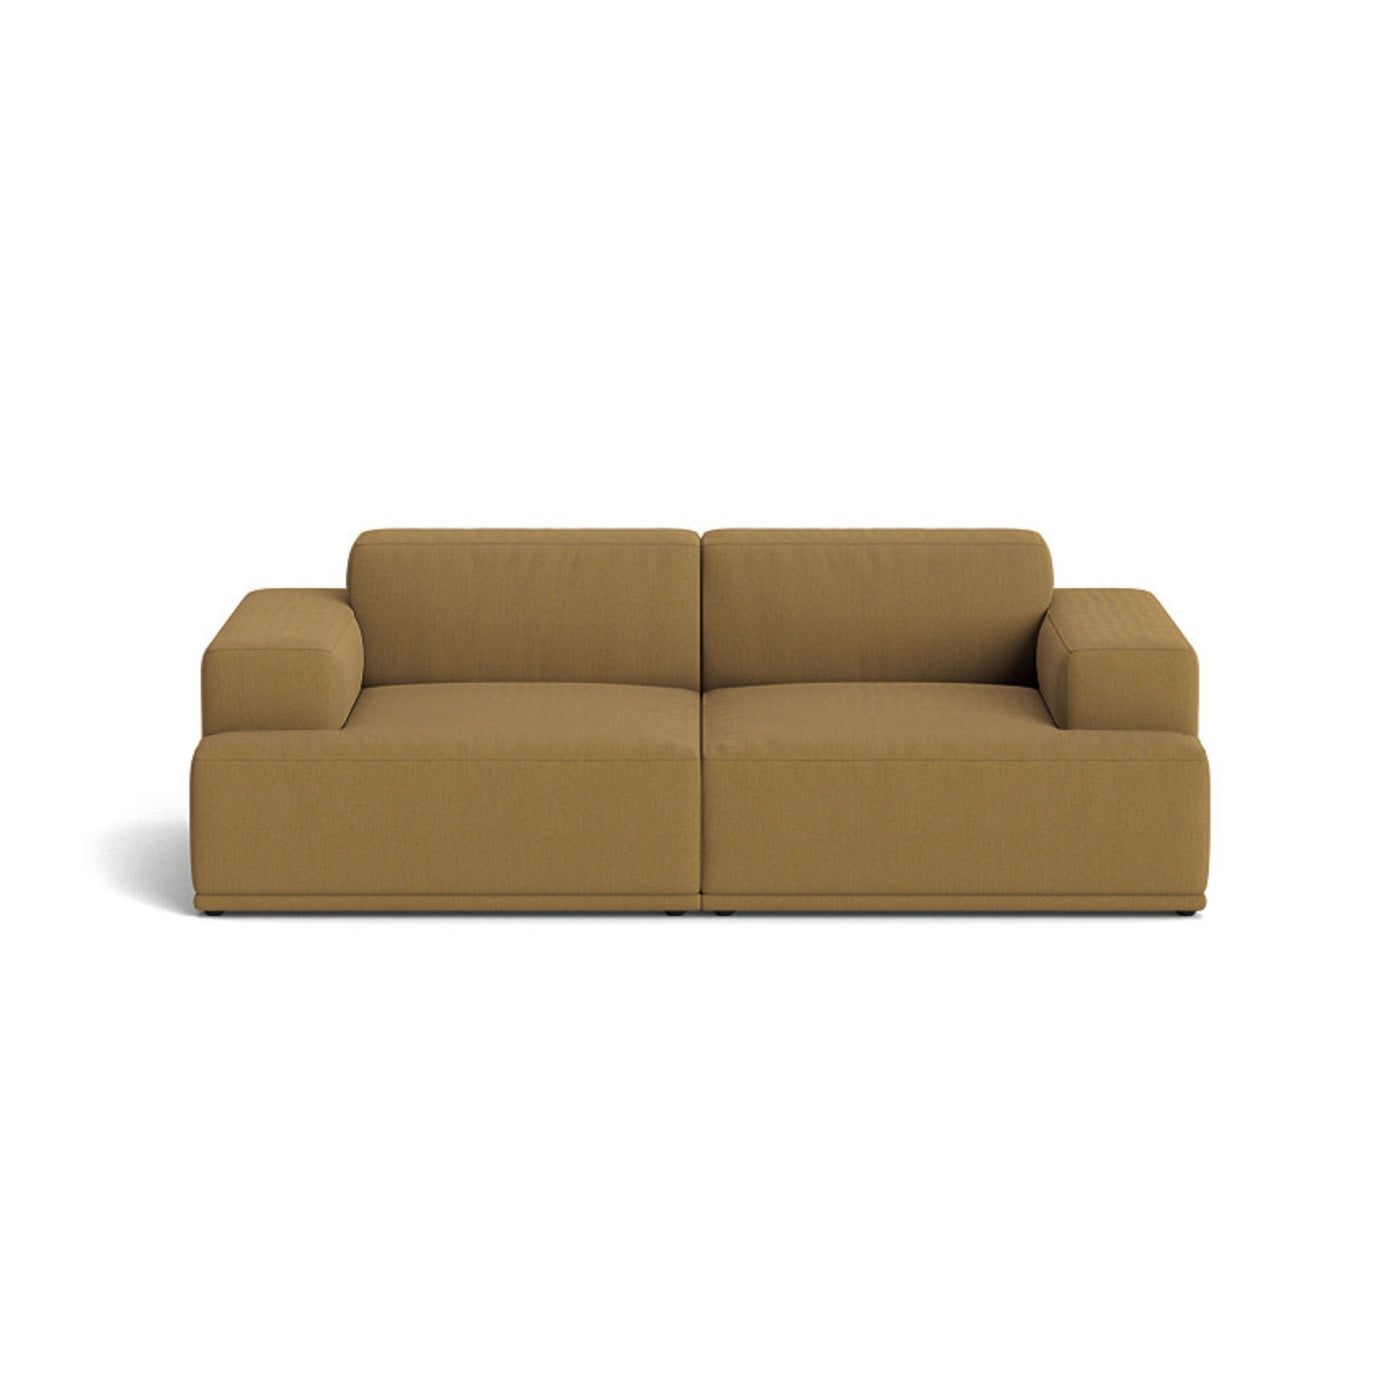 Muuto Connect Soft Modular 2 Seater Sofa, configuration 1. made-to-order from someday designs. #colour_re-wool-448